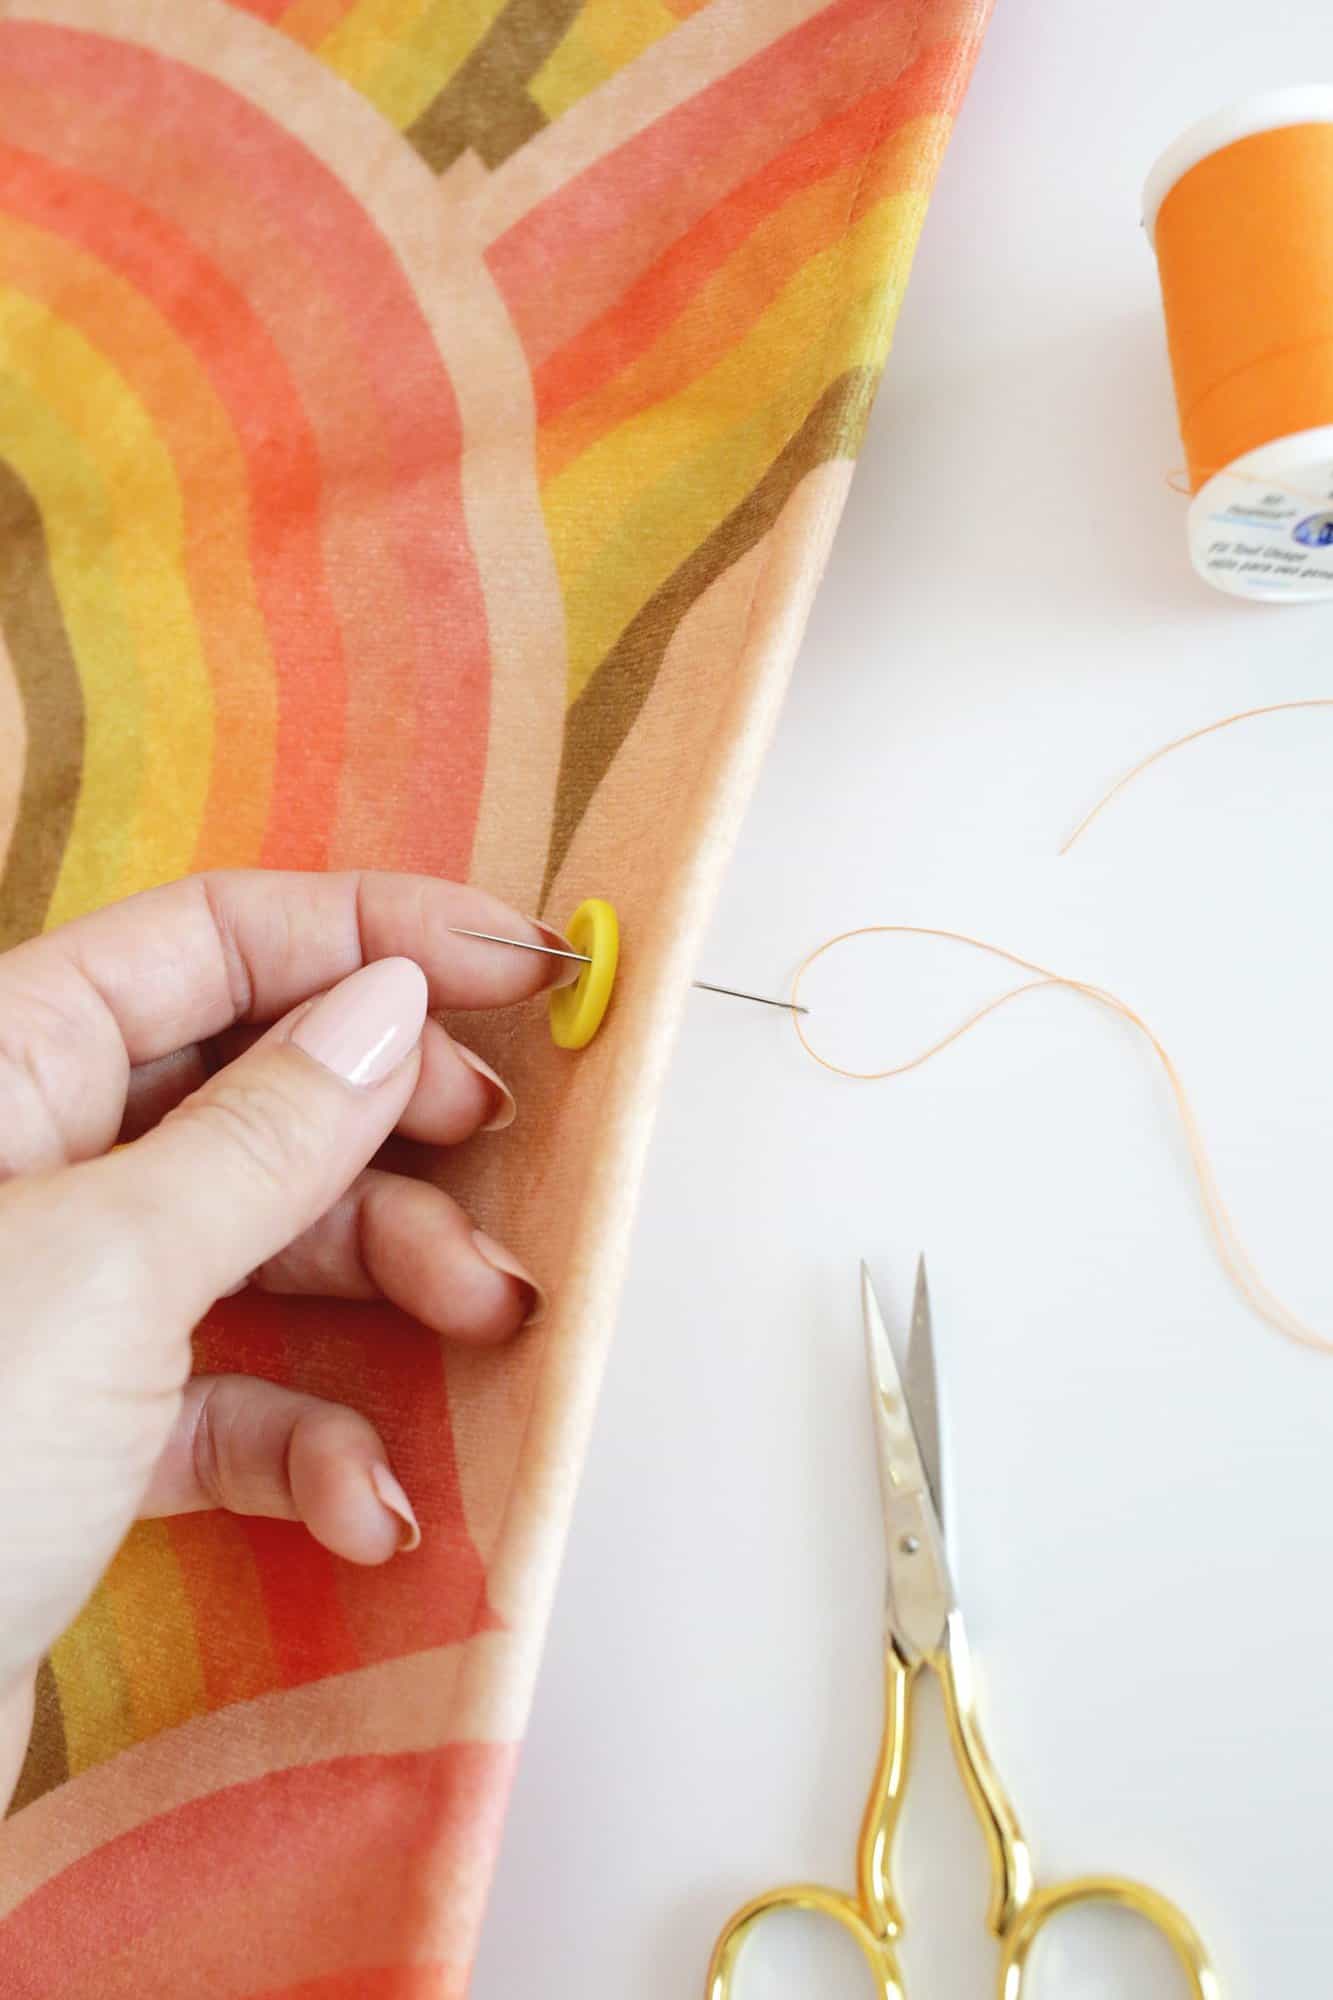 needle passing through fabric to sew a button